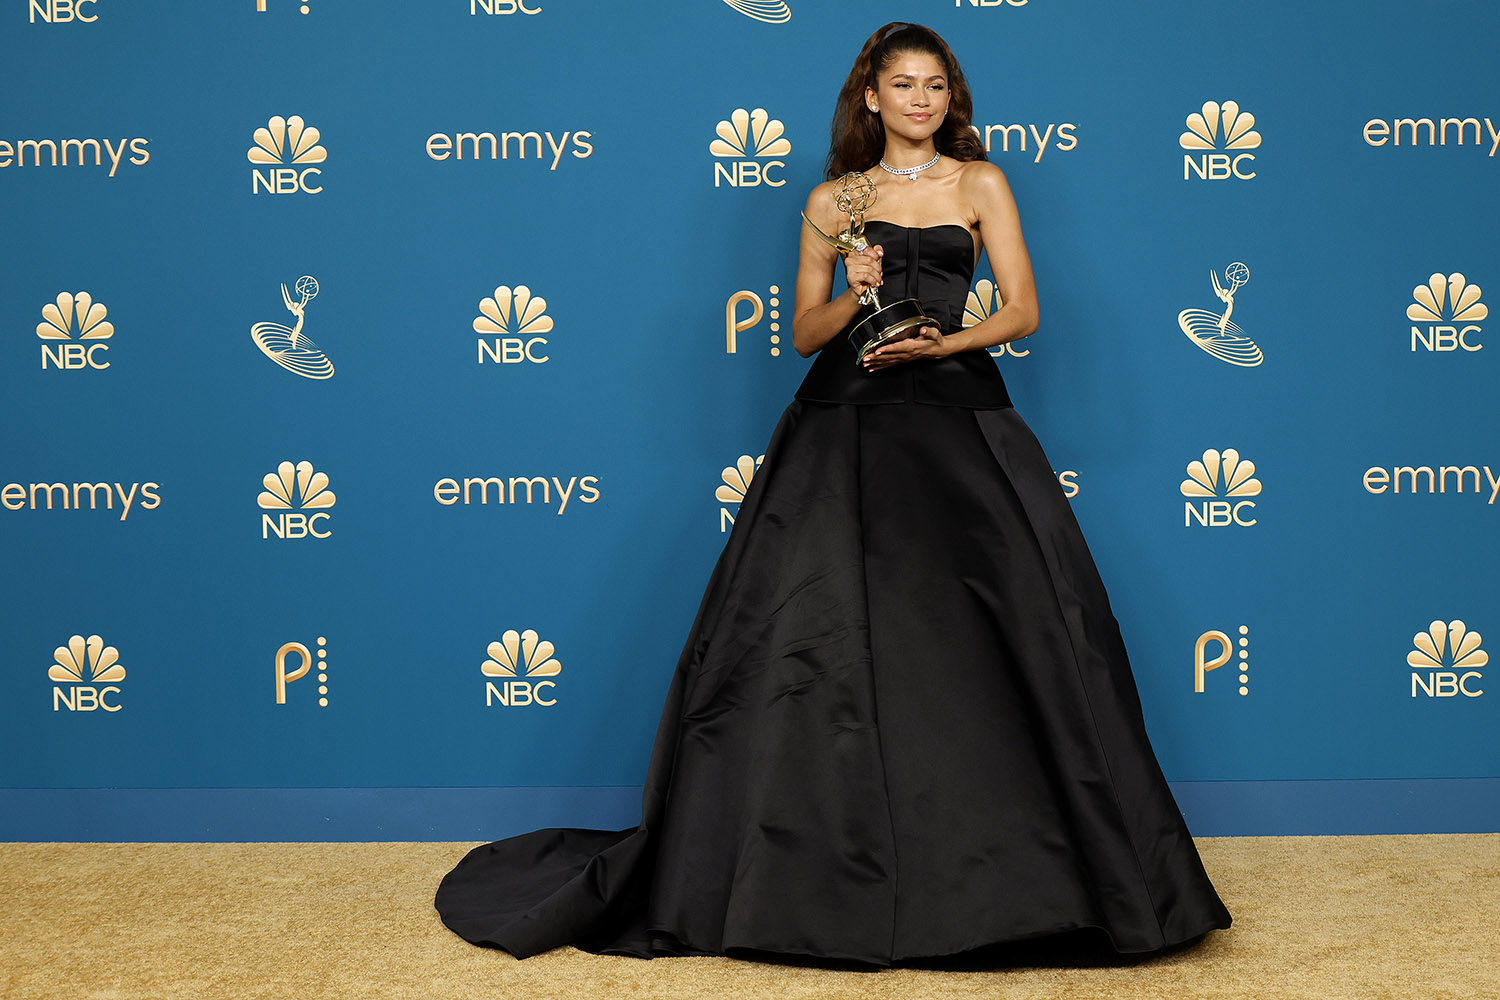 Zendaya poses with her Emmy Award after historic wins at the Emmys 2022